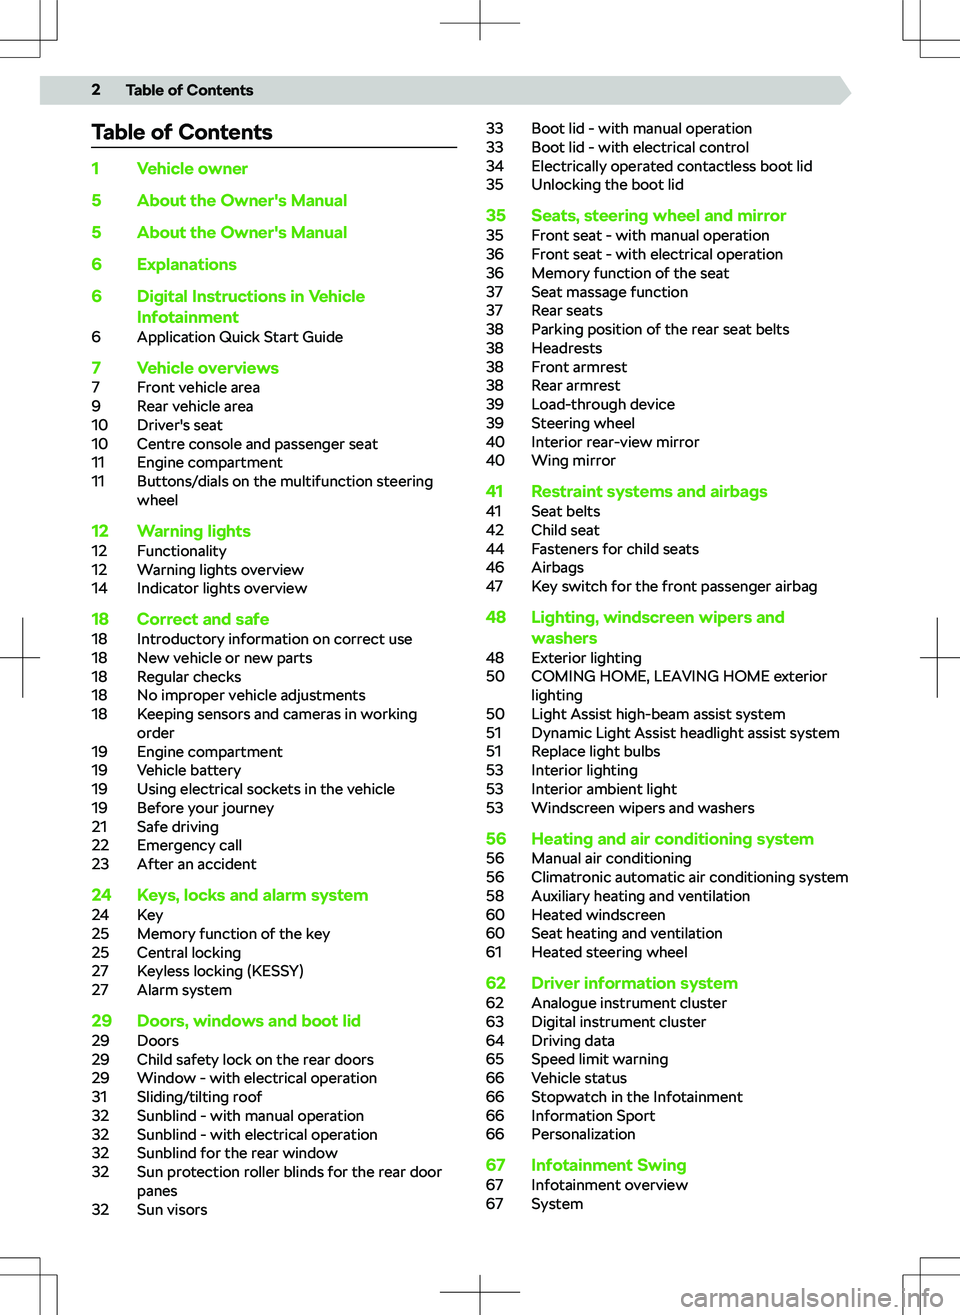 SKODA SUPERB 2019  Owner´s Manual Table of Contents1Vehicle owner5About the Owner